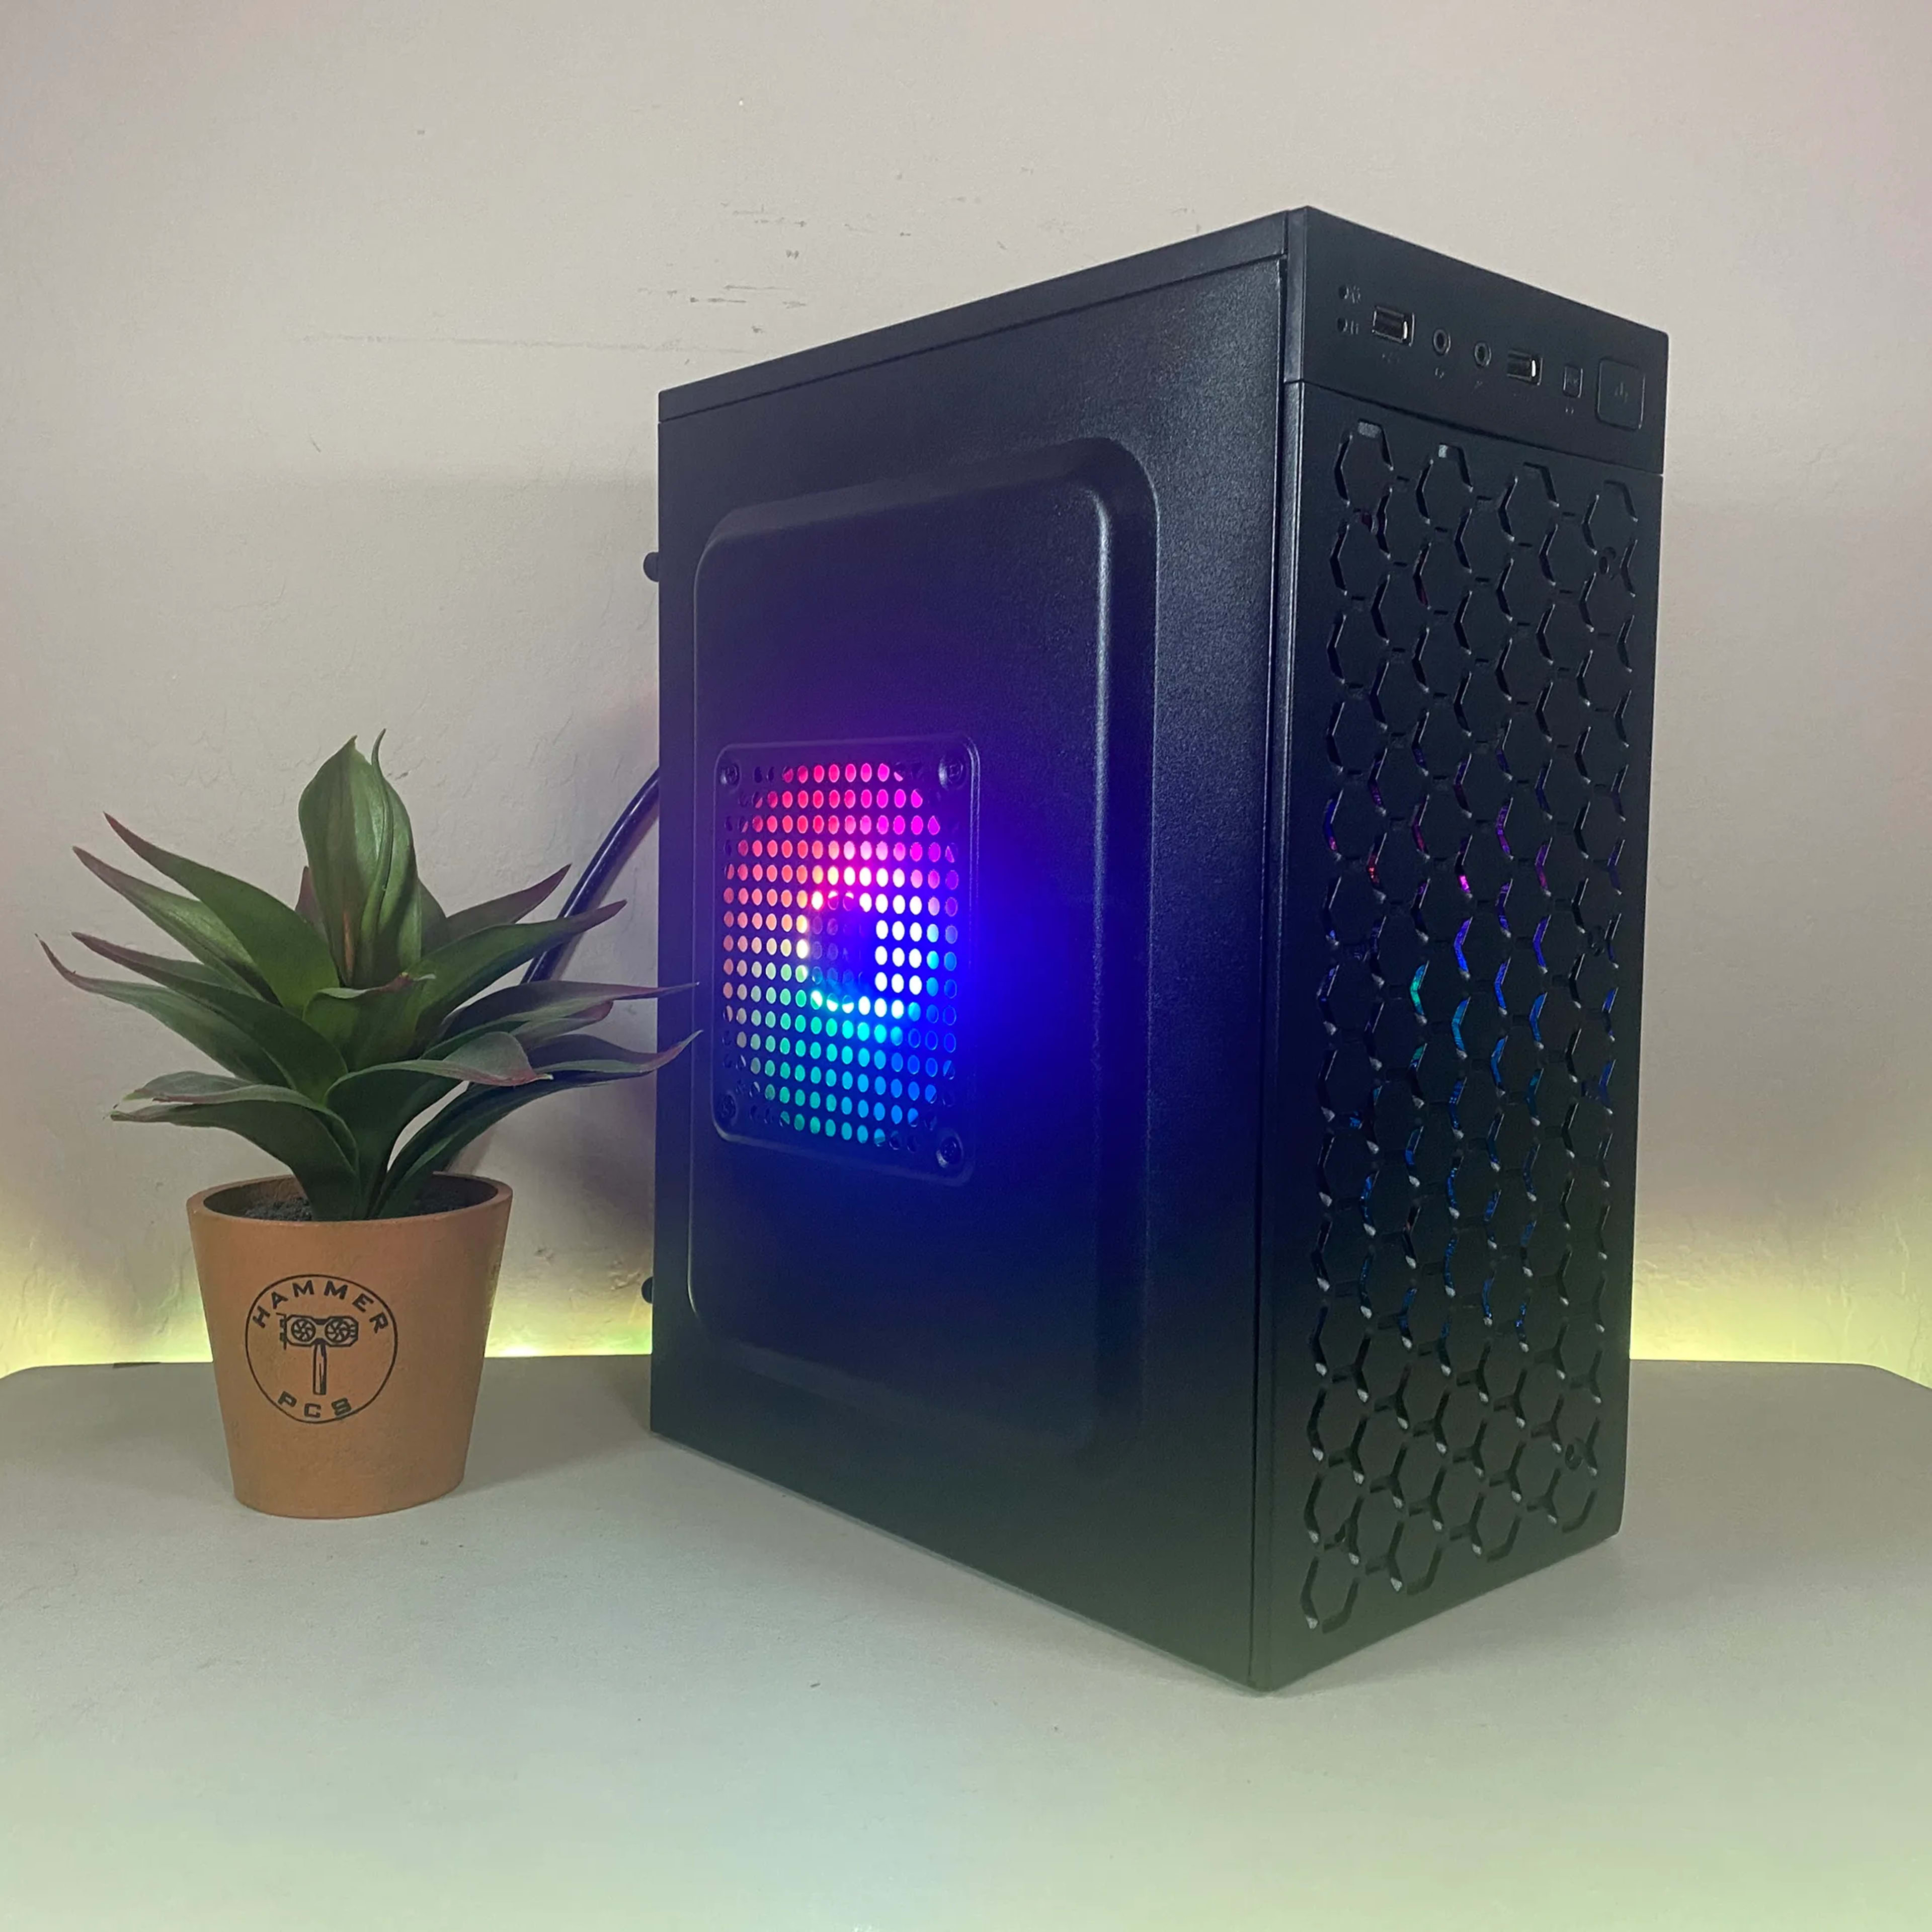 ✨ Awesome Inexpensive RGB Gaming PC ✨ Fortnite, Valorant, Roblox, Minecraft, and more!